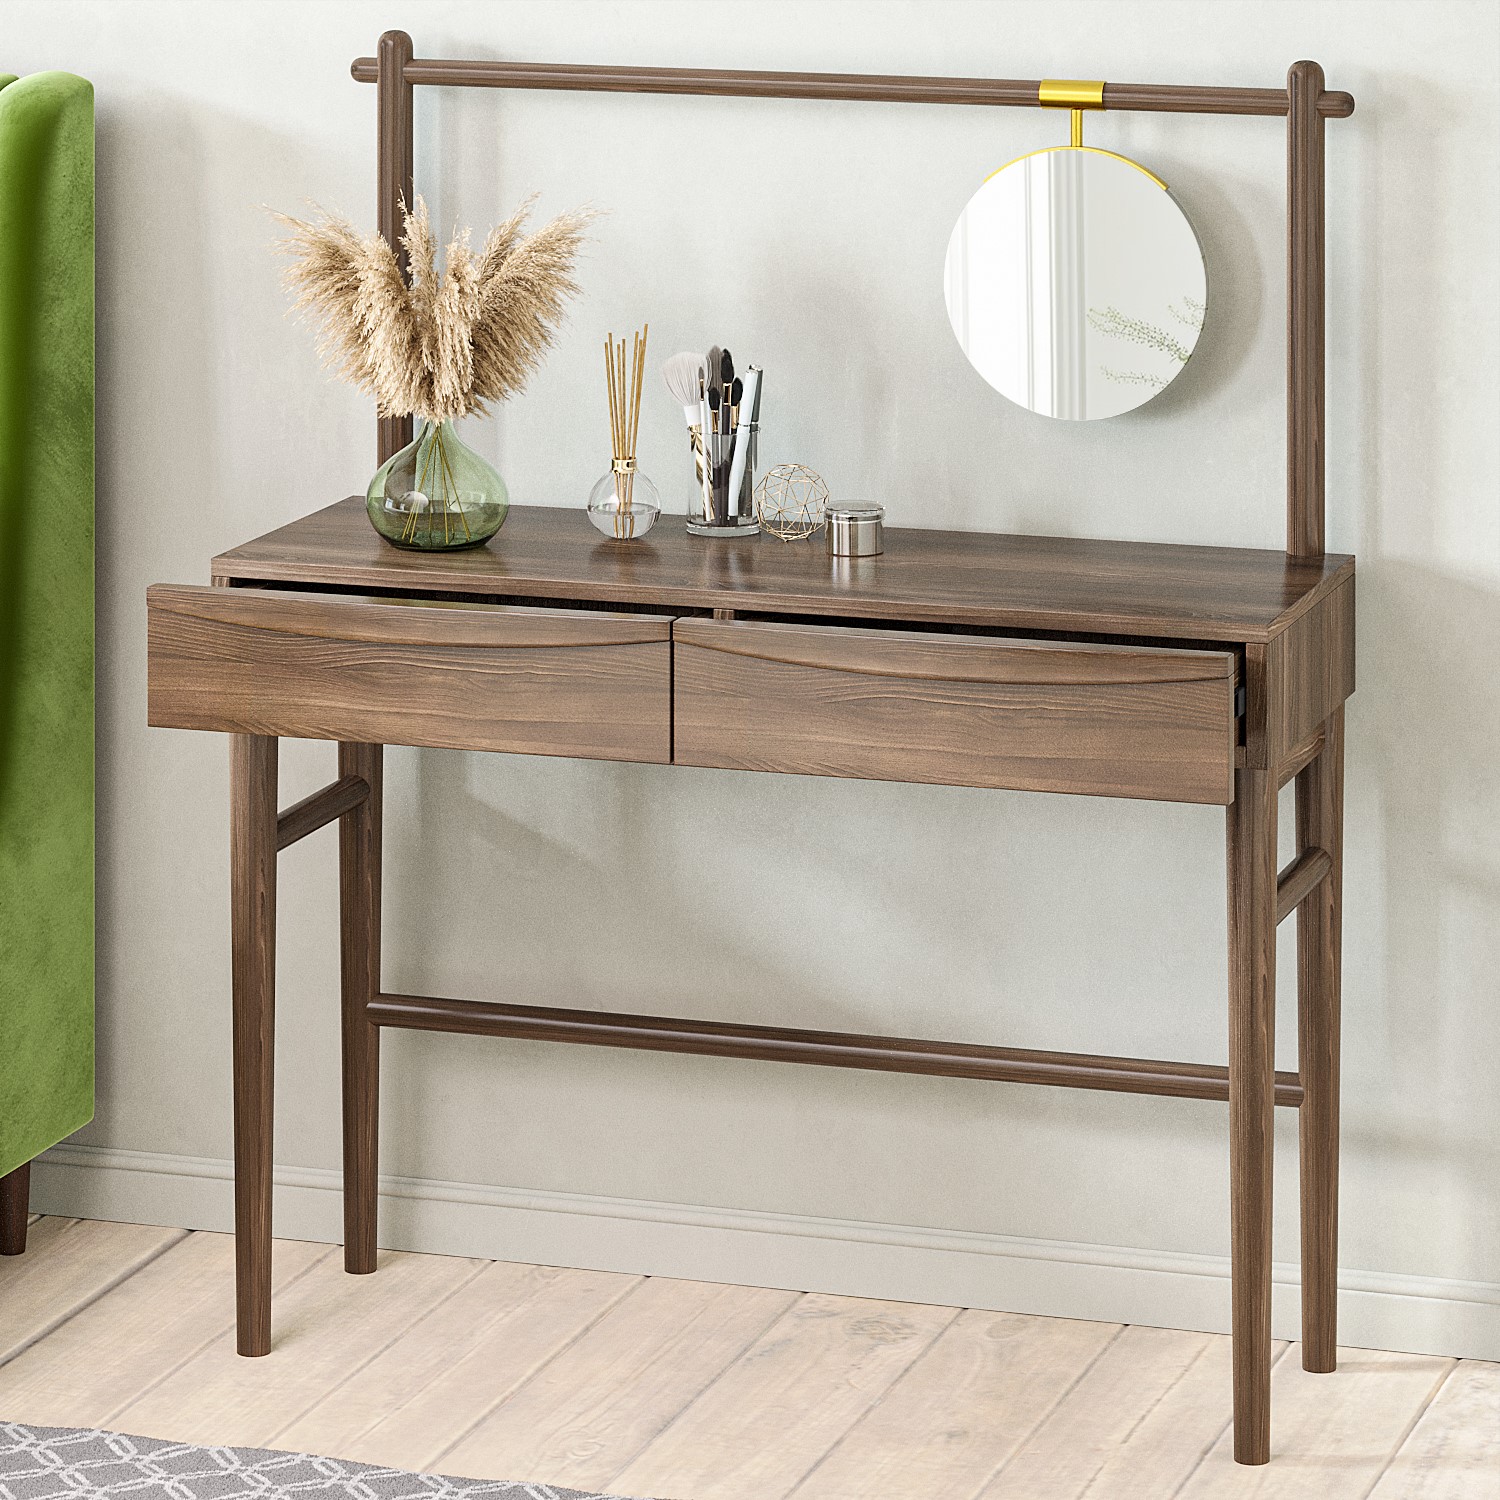 Read more about Walnut mid-century dressing table with mirror and drawers frances